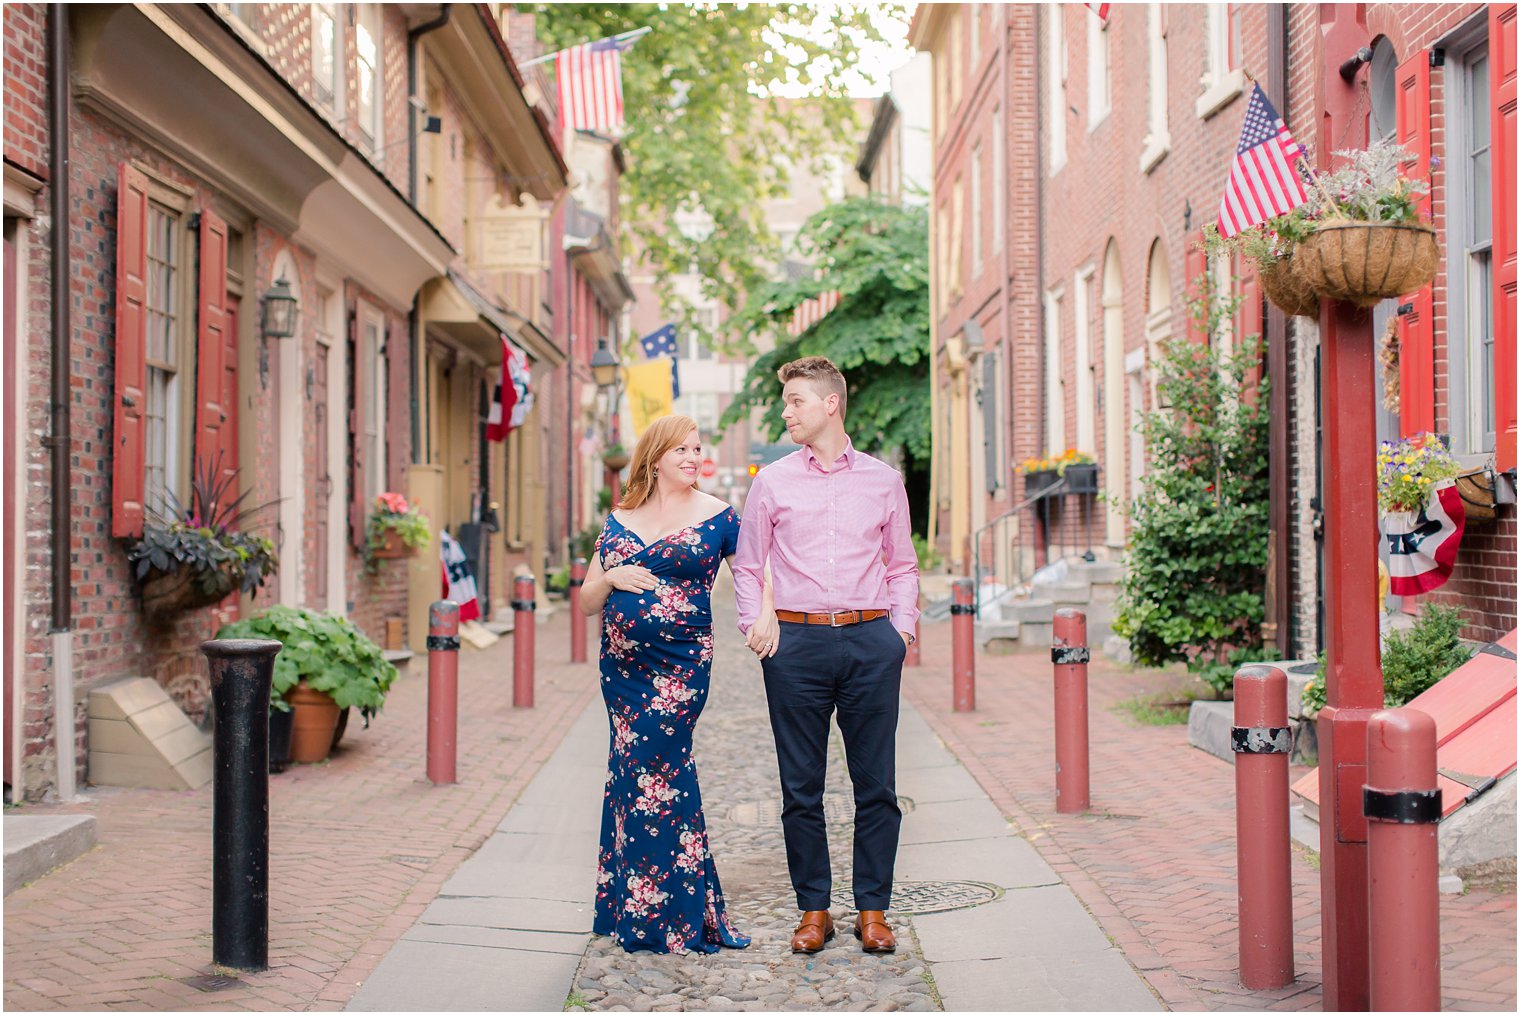 Maternity photo in Elfreth's Alley in Philly